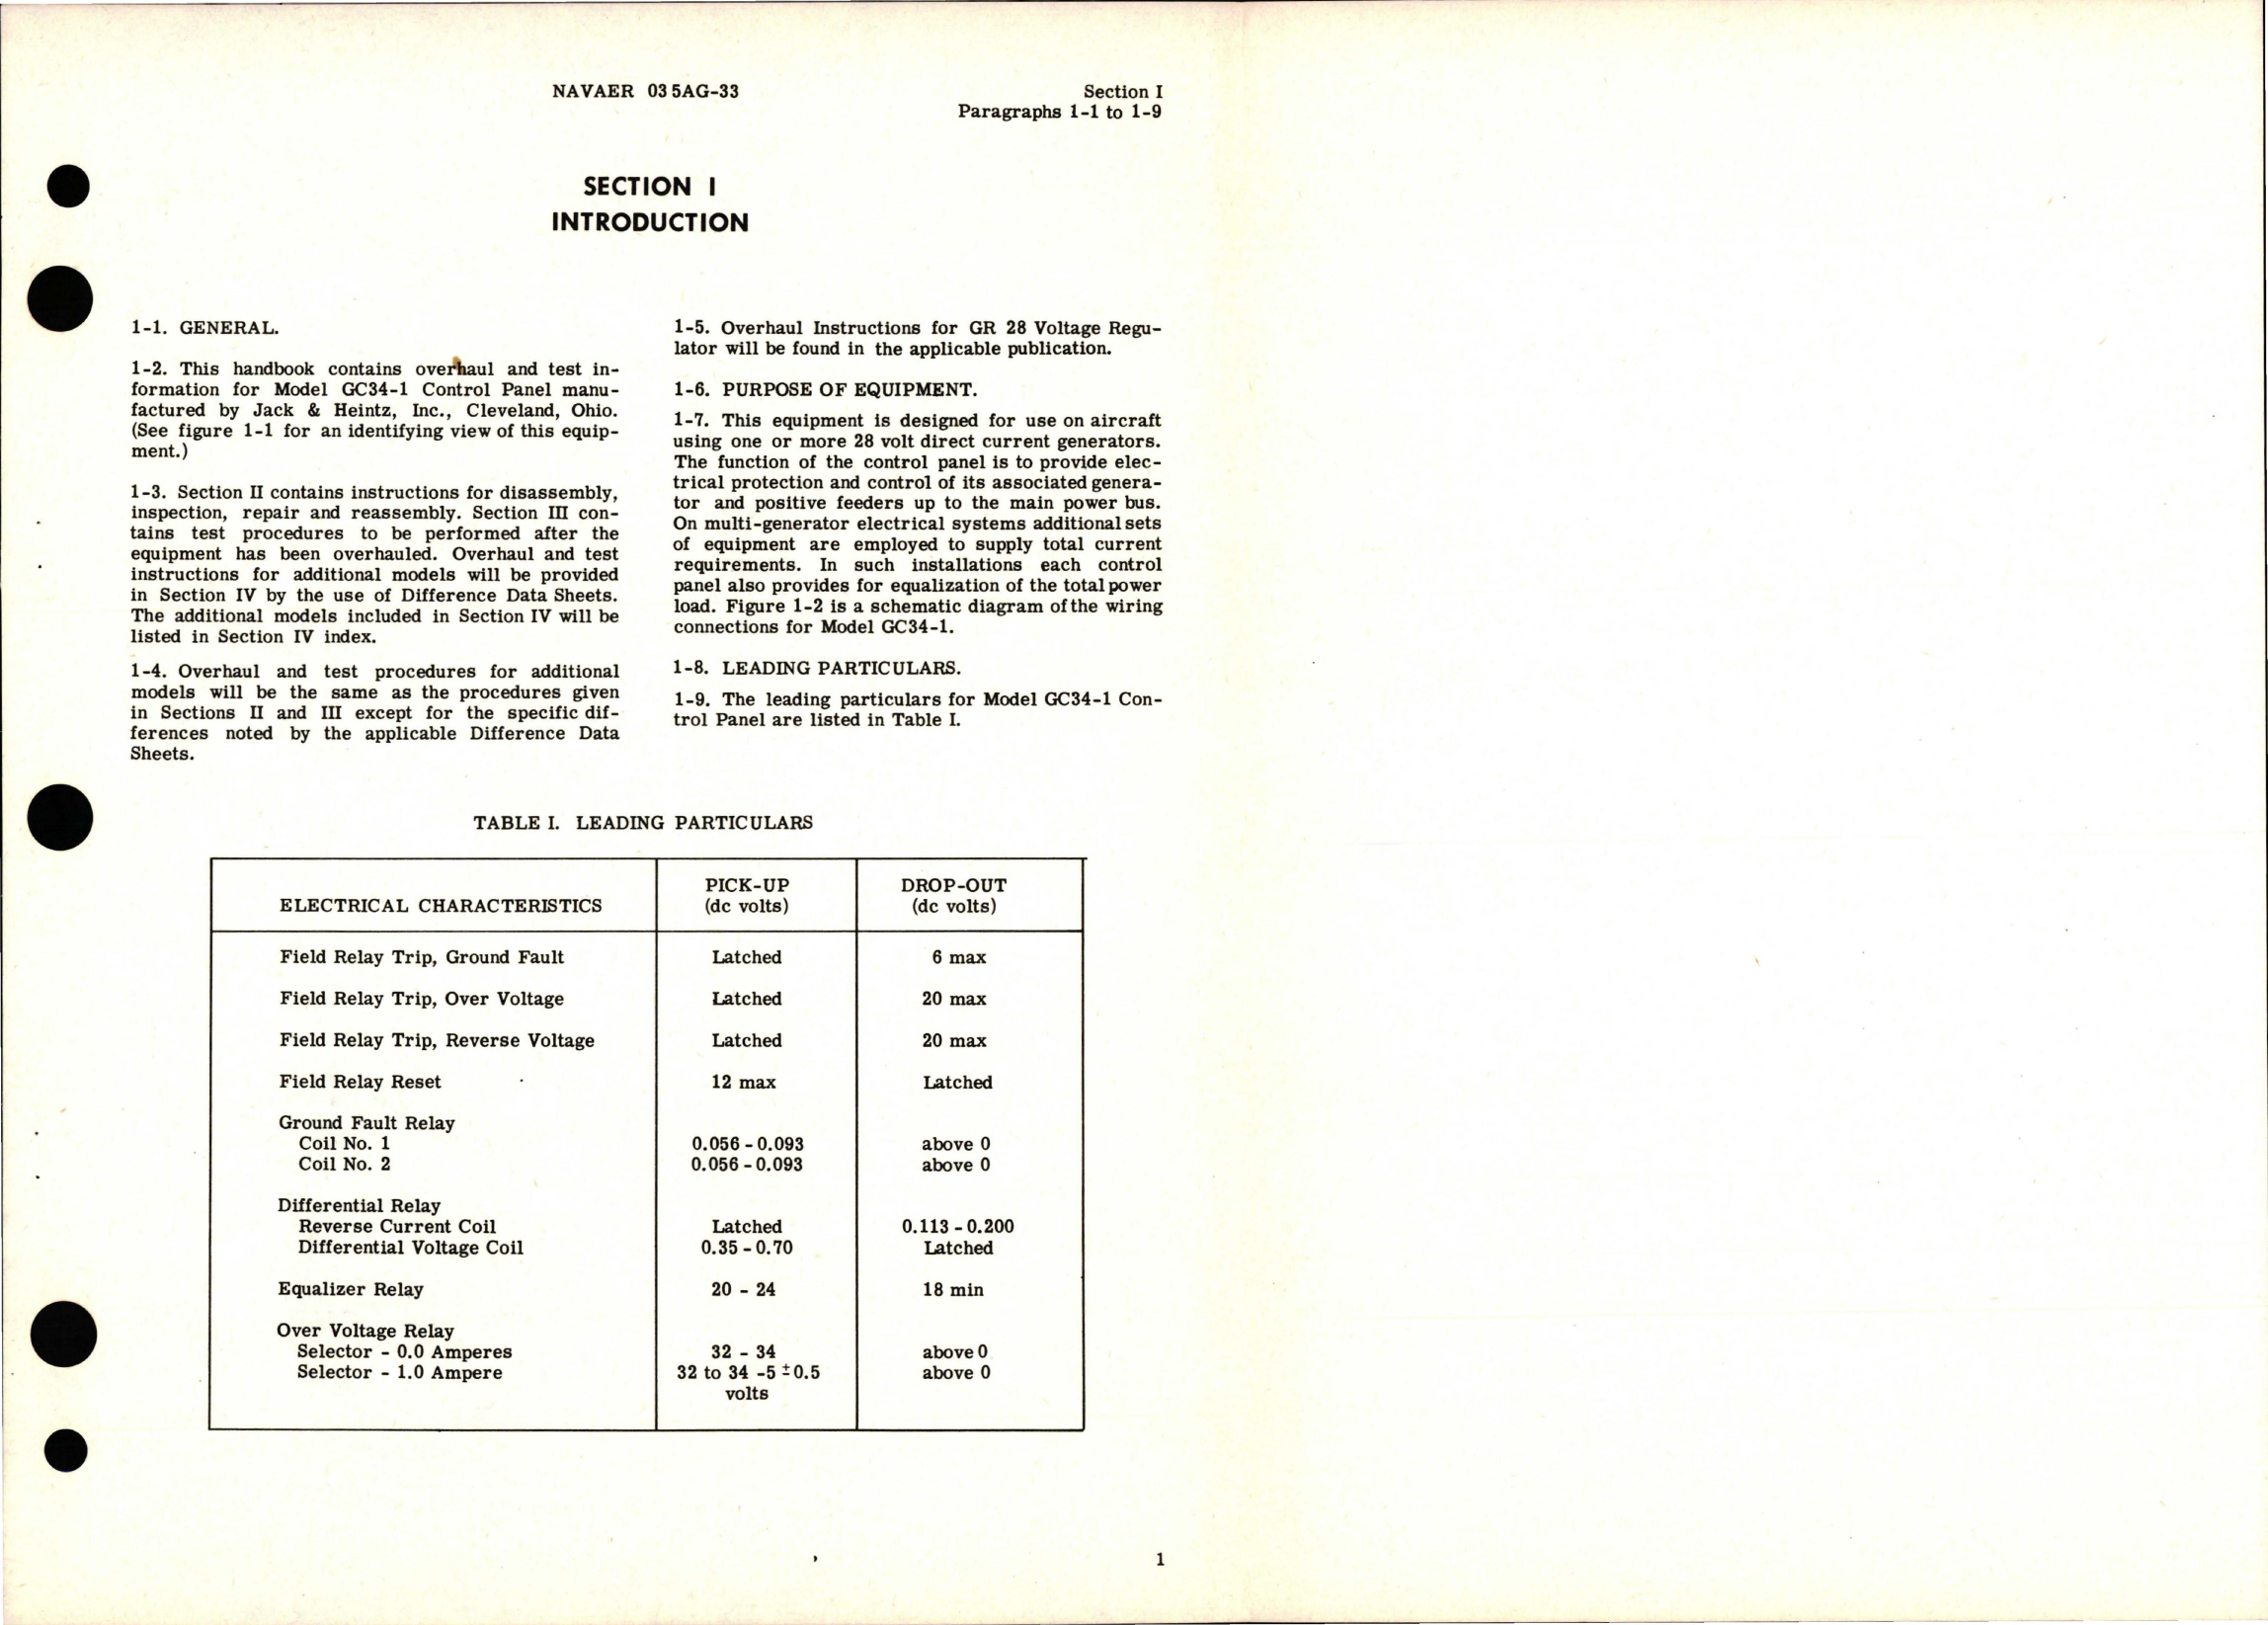 Sample page 5 from AirCorps Library document: Overhaul Instructions for Control Panel - Model GC34-1